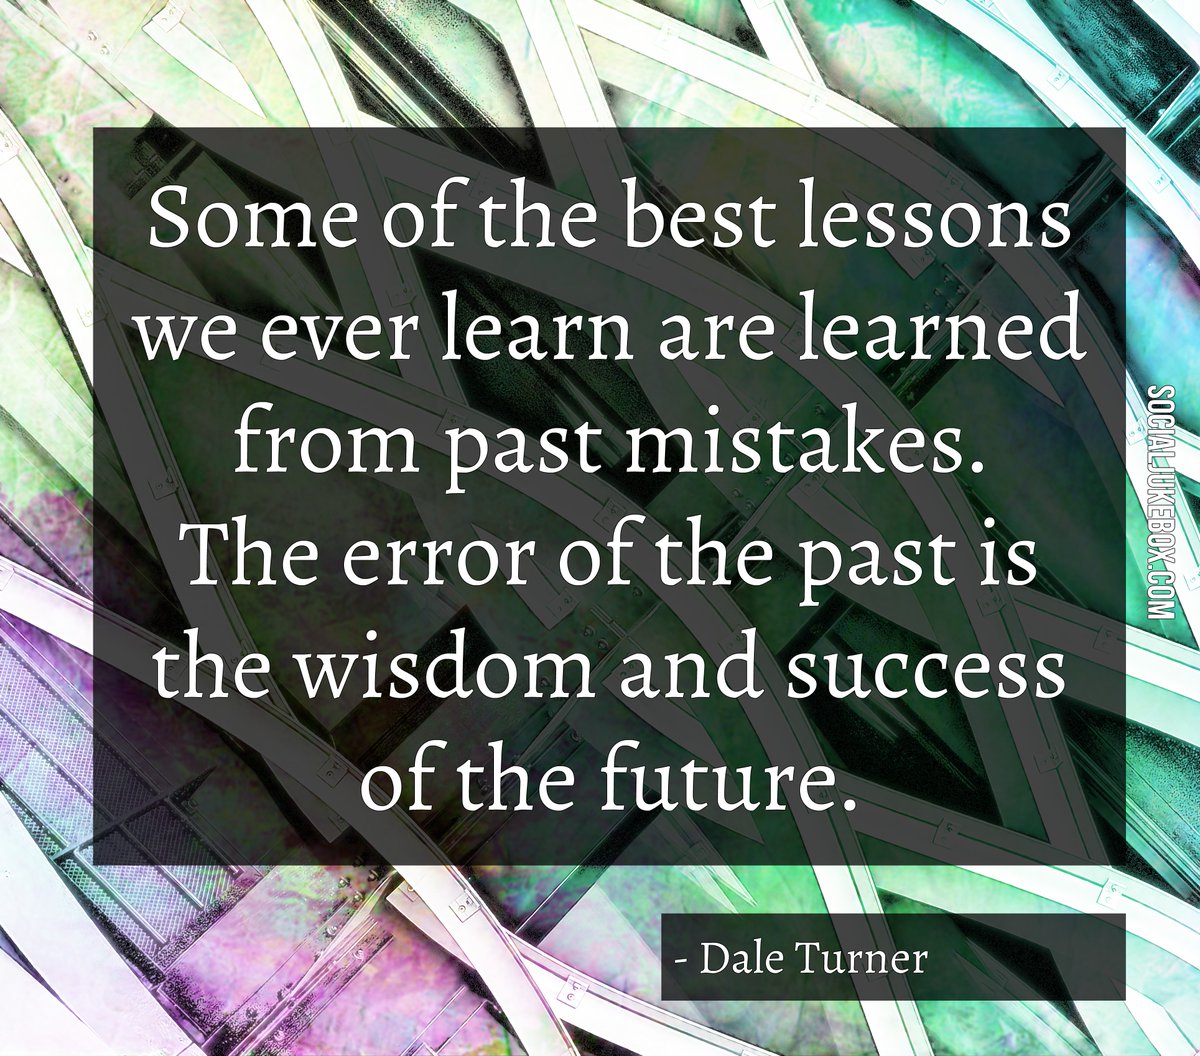 Mistakes are the best way to learn.